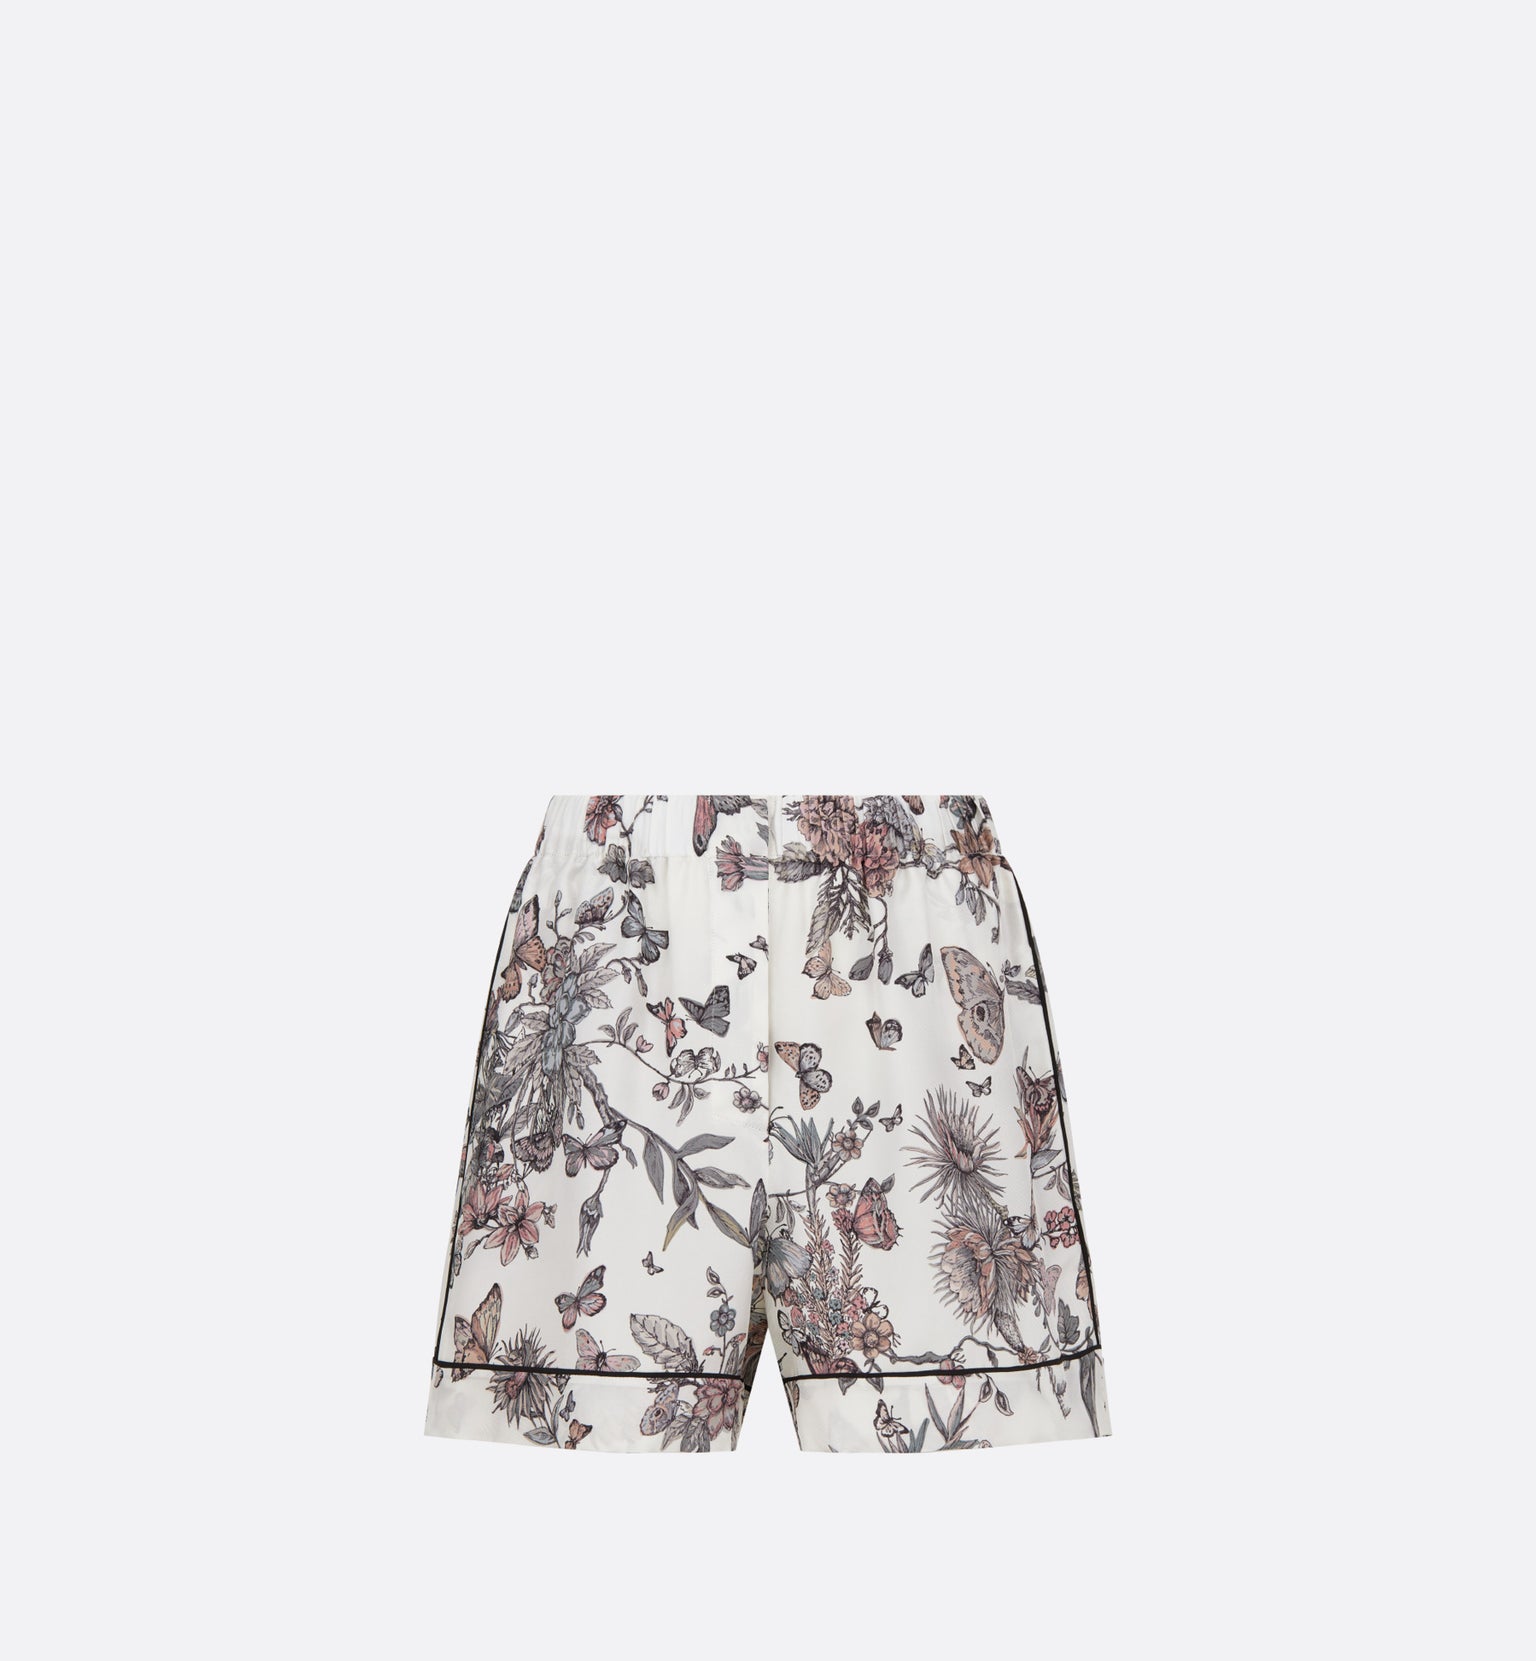 Shorts • White and Pastel Pink Toile de Jouy Mexico Silk Twill